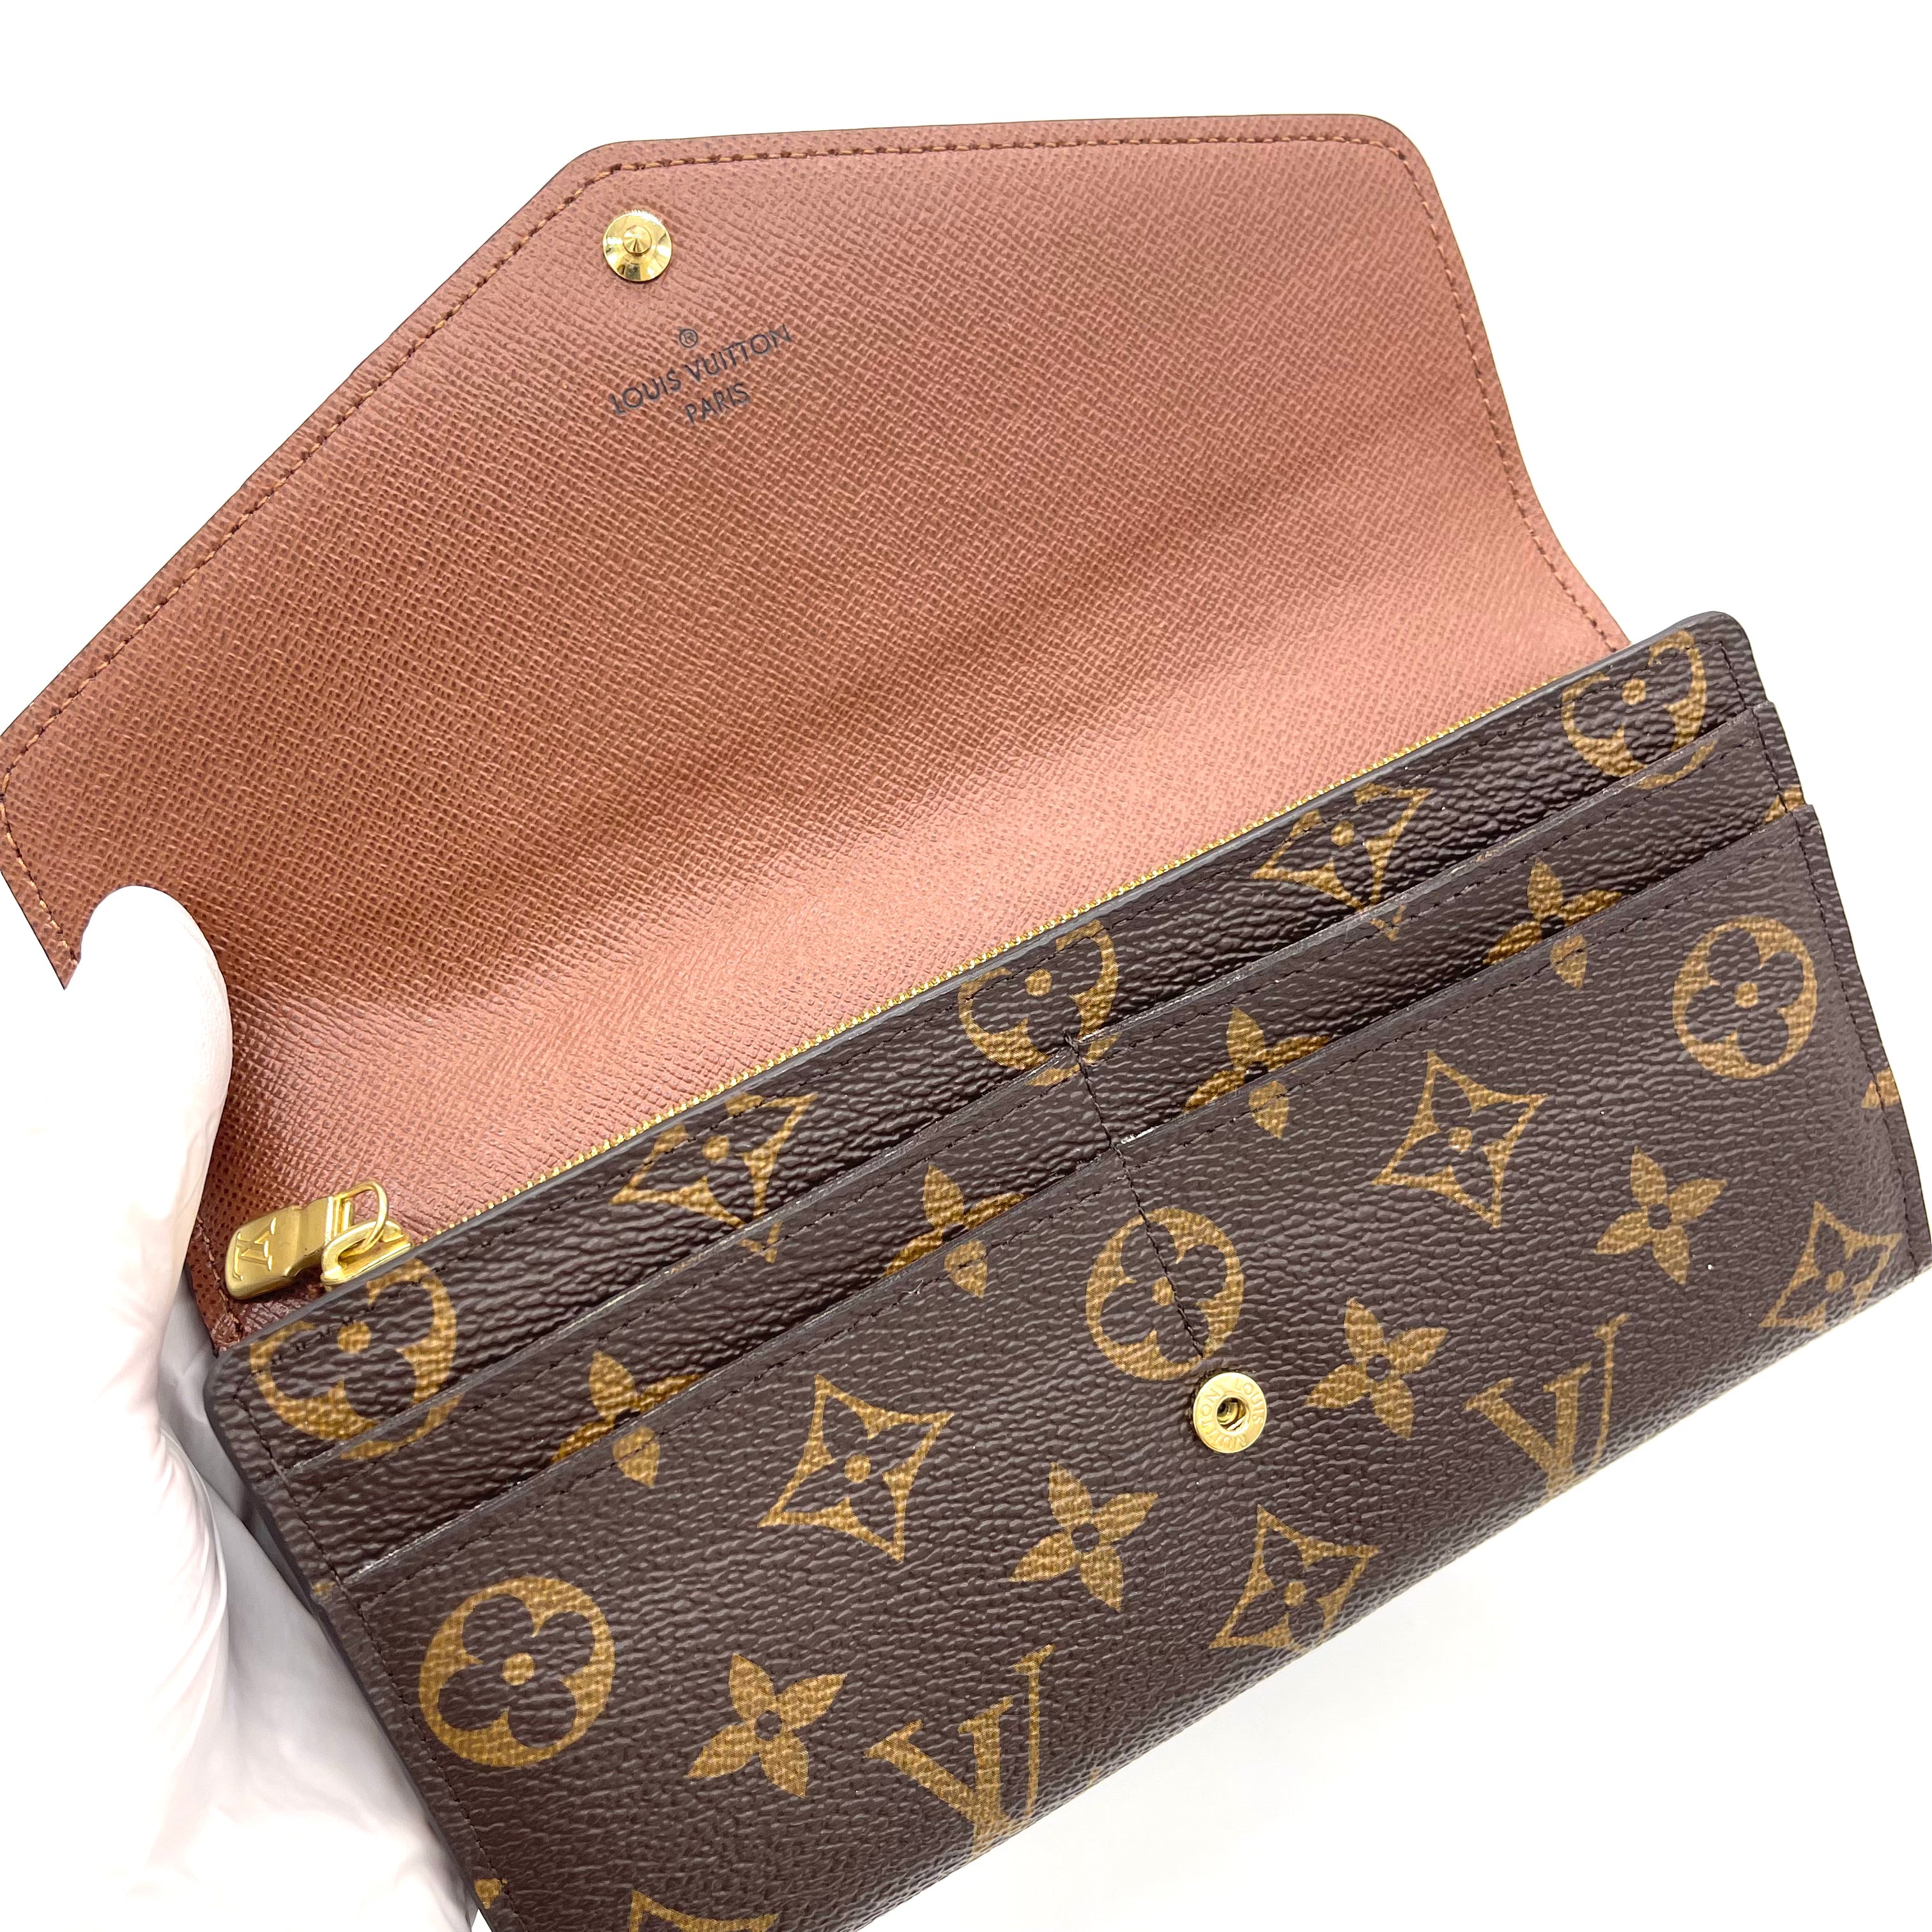 Sarah leather wallet Louis Vuitton Brown in Leather - 31287255